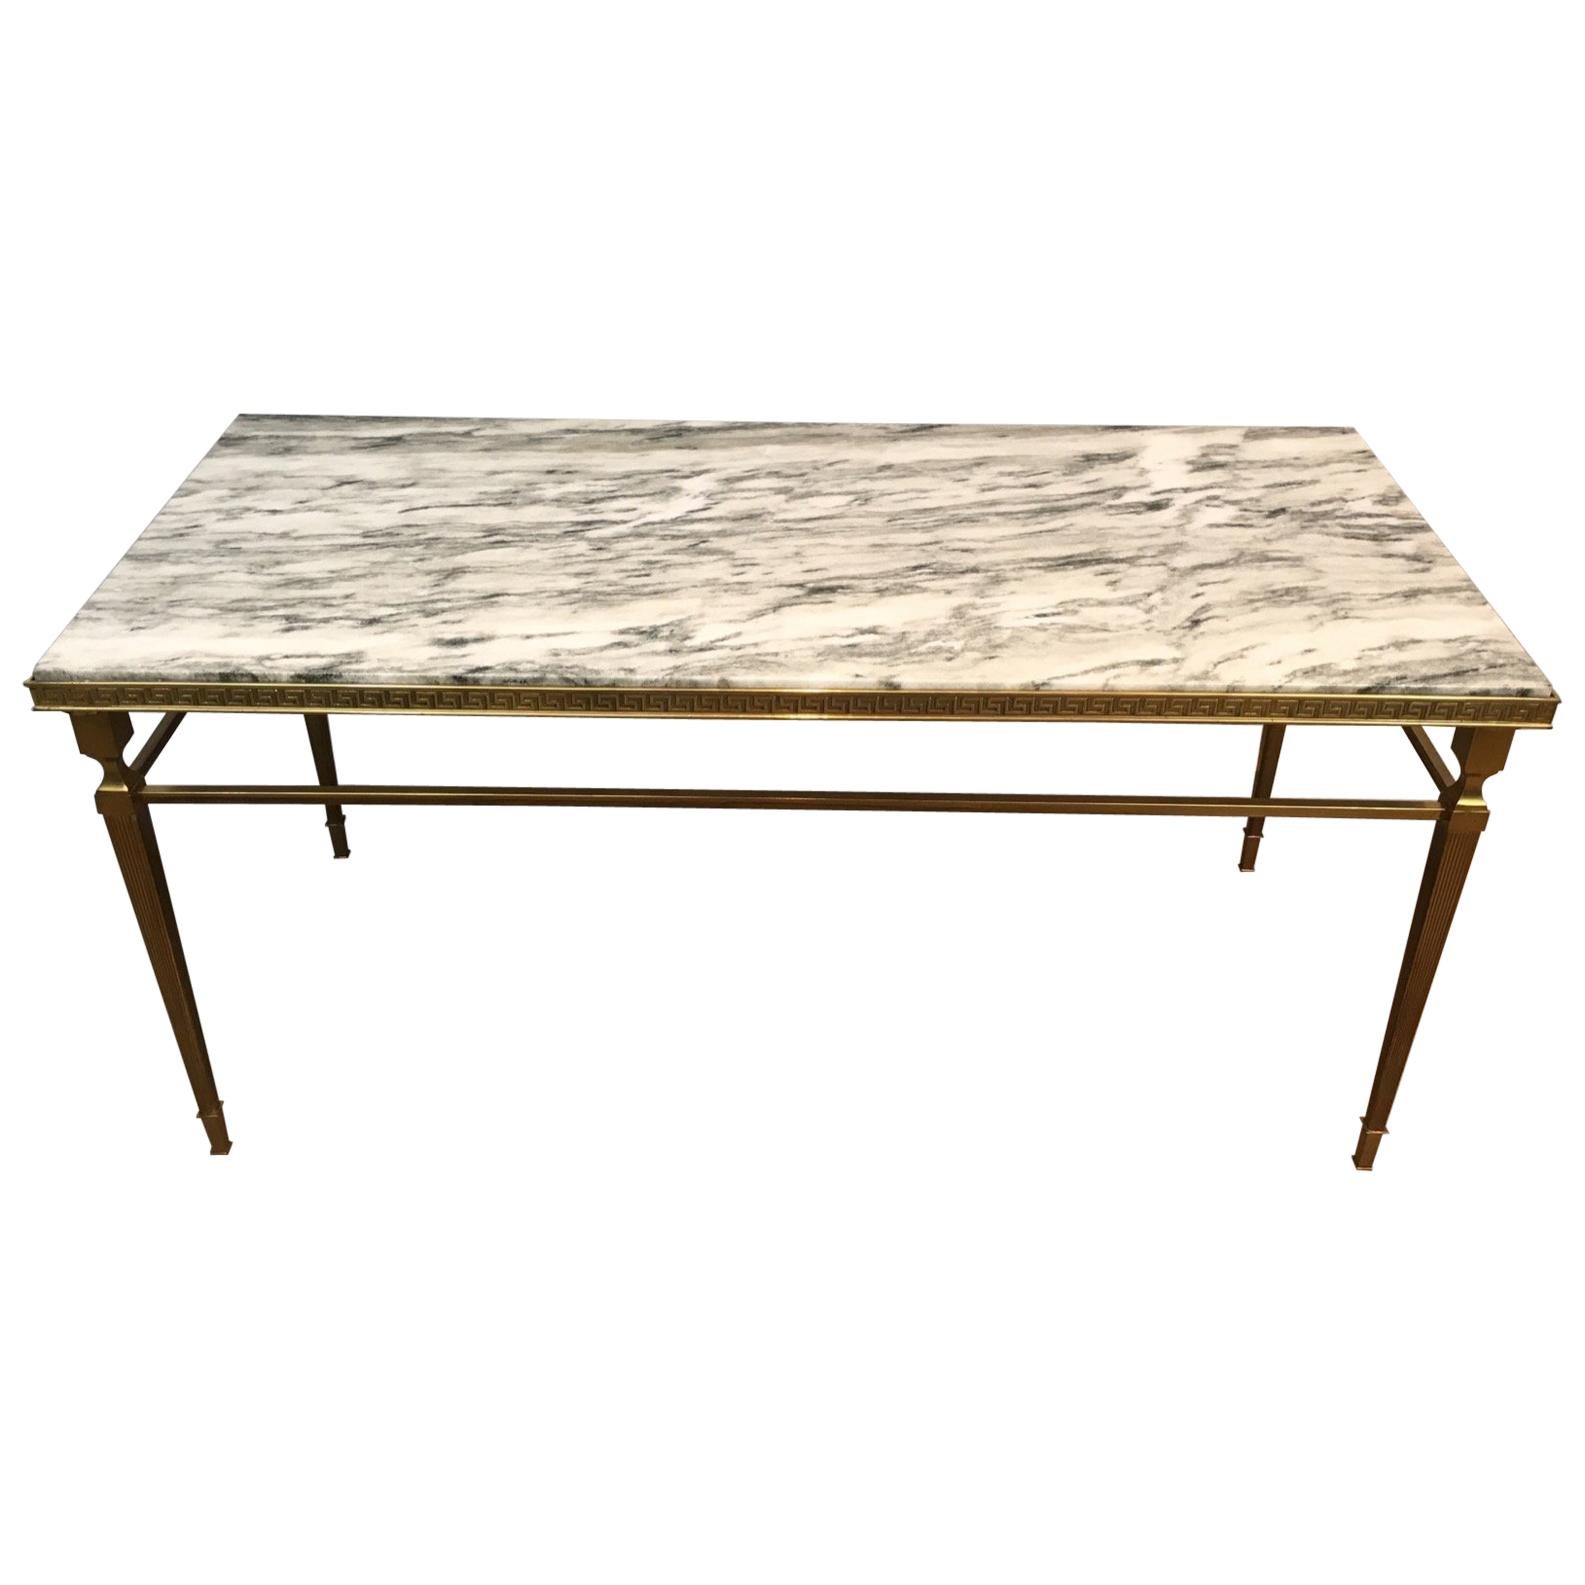 Attributed to Maison Jansen, Neoclassical Brass Coffee Table with Marble Top